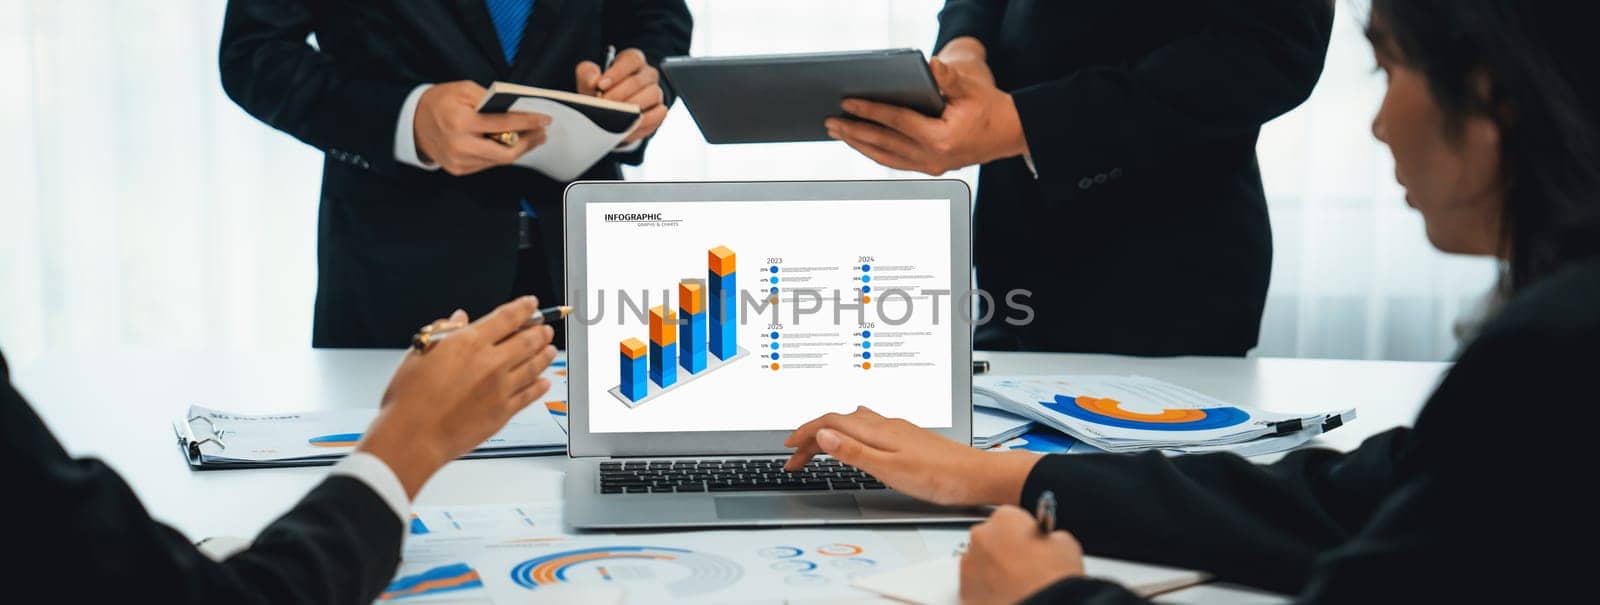 Business data dashboard analysis by computer software . Investment application display business sales and profit on the computer screen and advise marketing planning decision oratory .